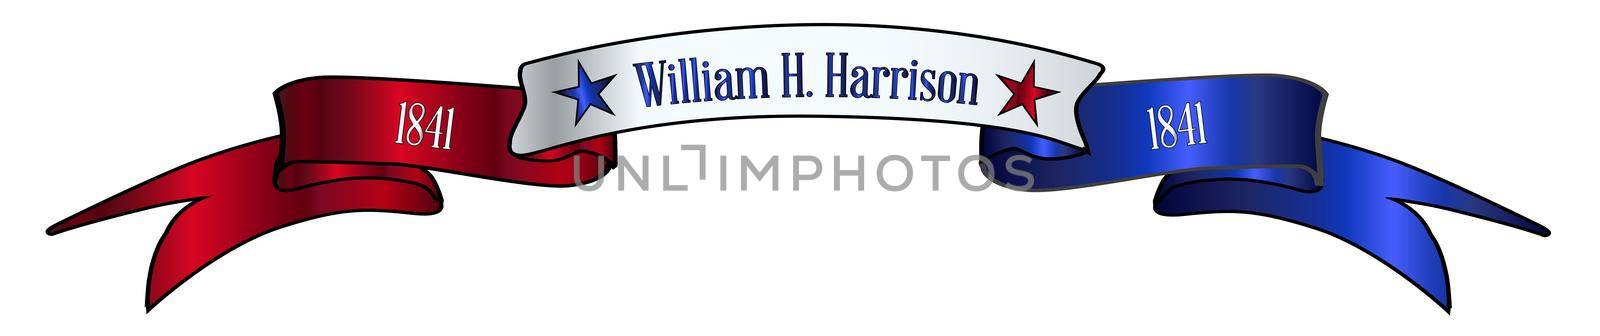 A red white and blue satin or silk ribbon banner with the text William H Harrison and stars and date in office